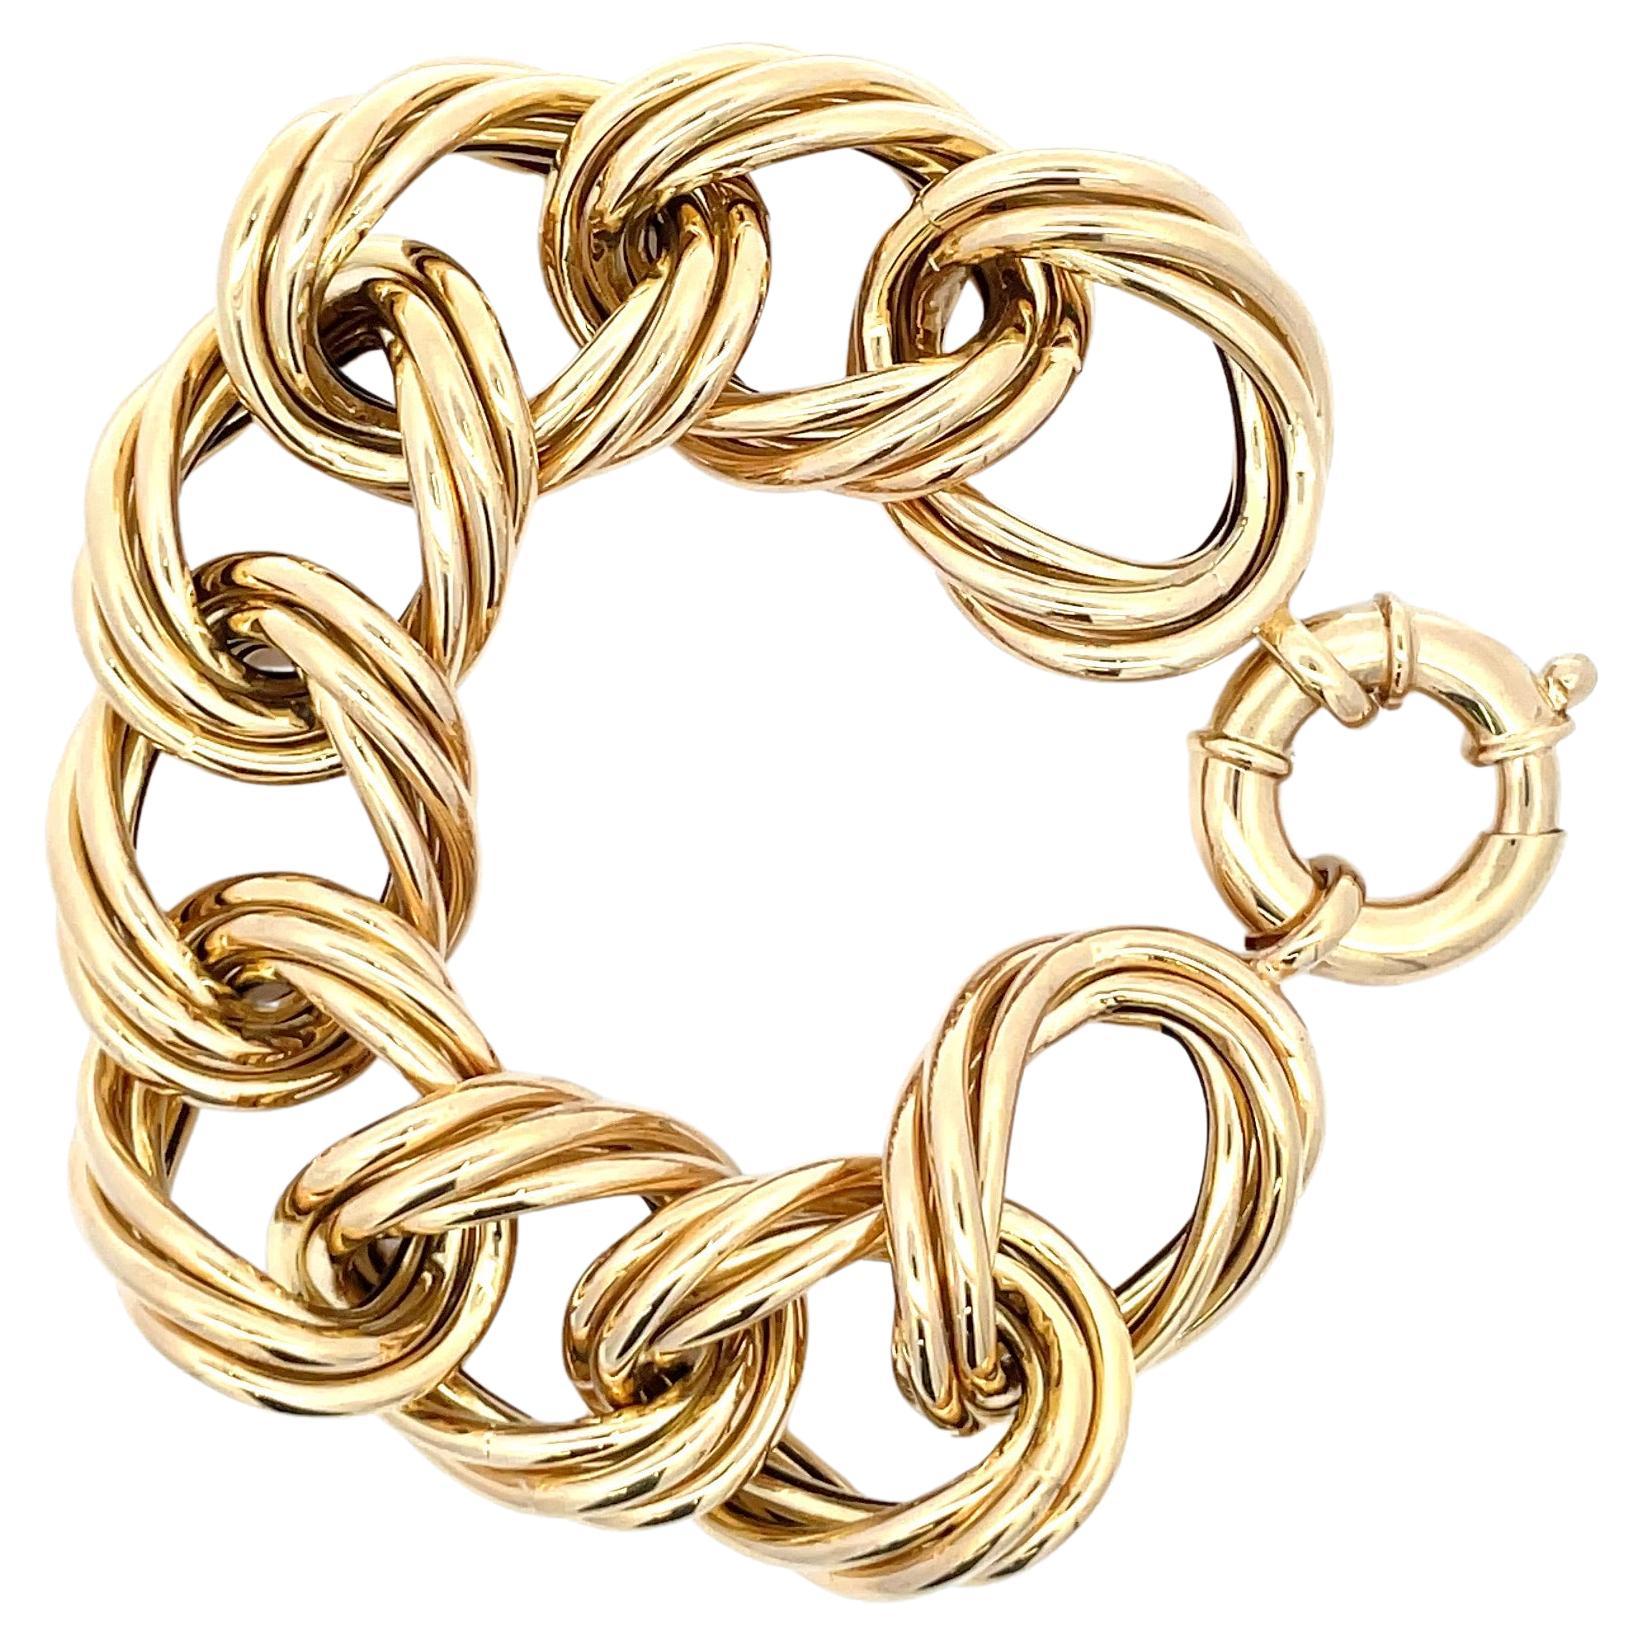 Made in Italy, this 14 Karat Yellow Gold bracelet features 9 oversized links weighing 35.1 grams. 
More link bracelets in stock. 